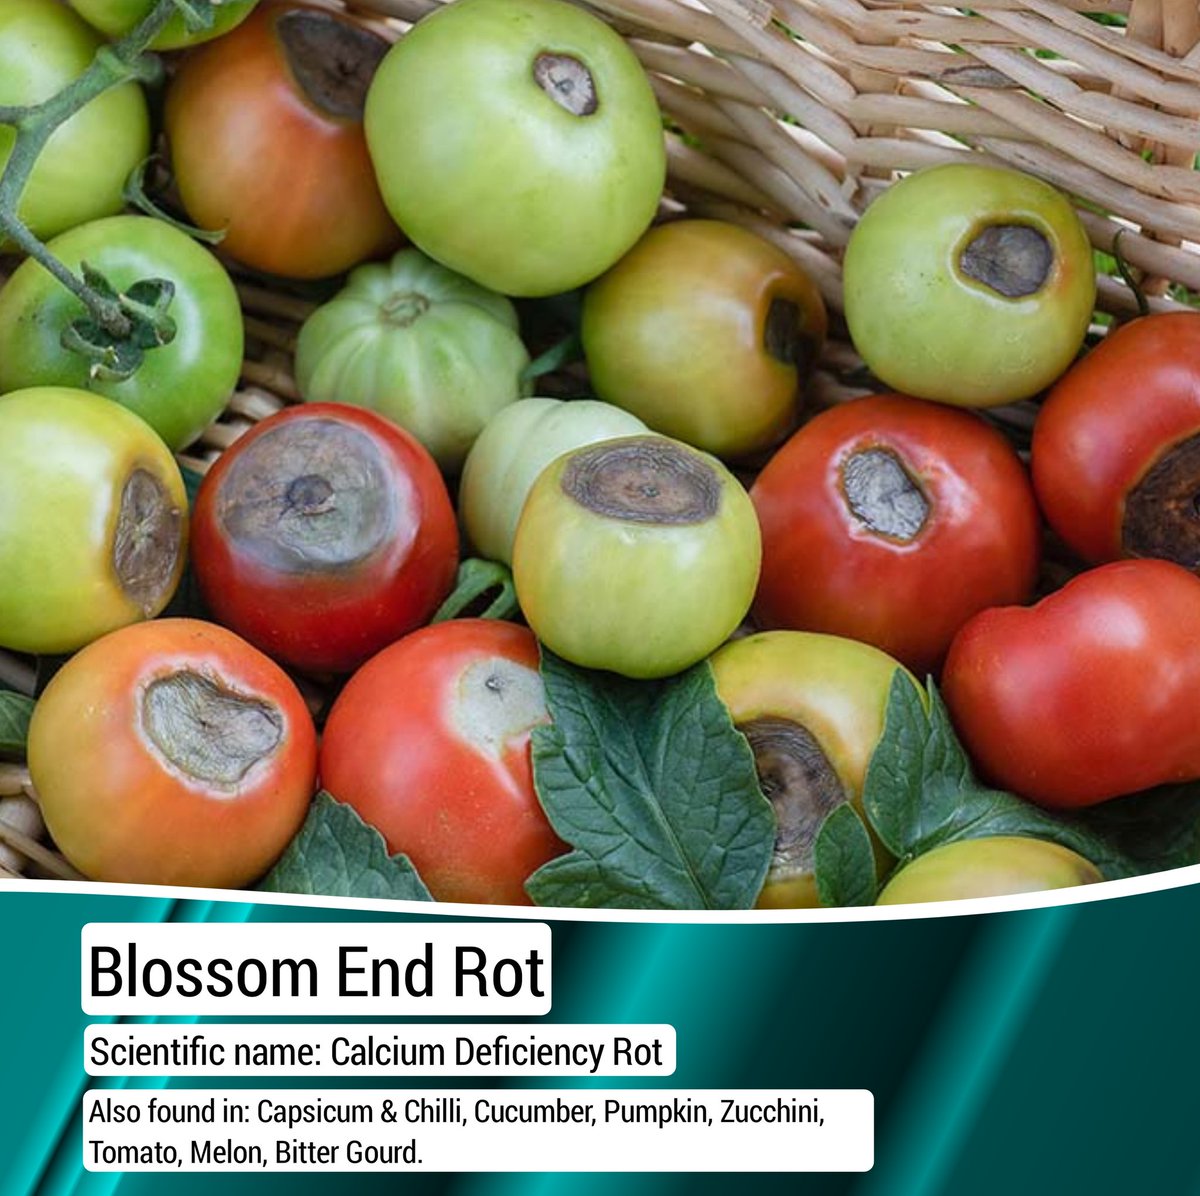 Blossom End Rot

#calciumdeficiency 
#calcium
#disease 
#tomatocultivation